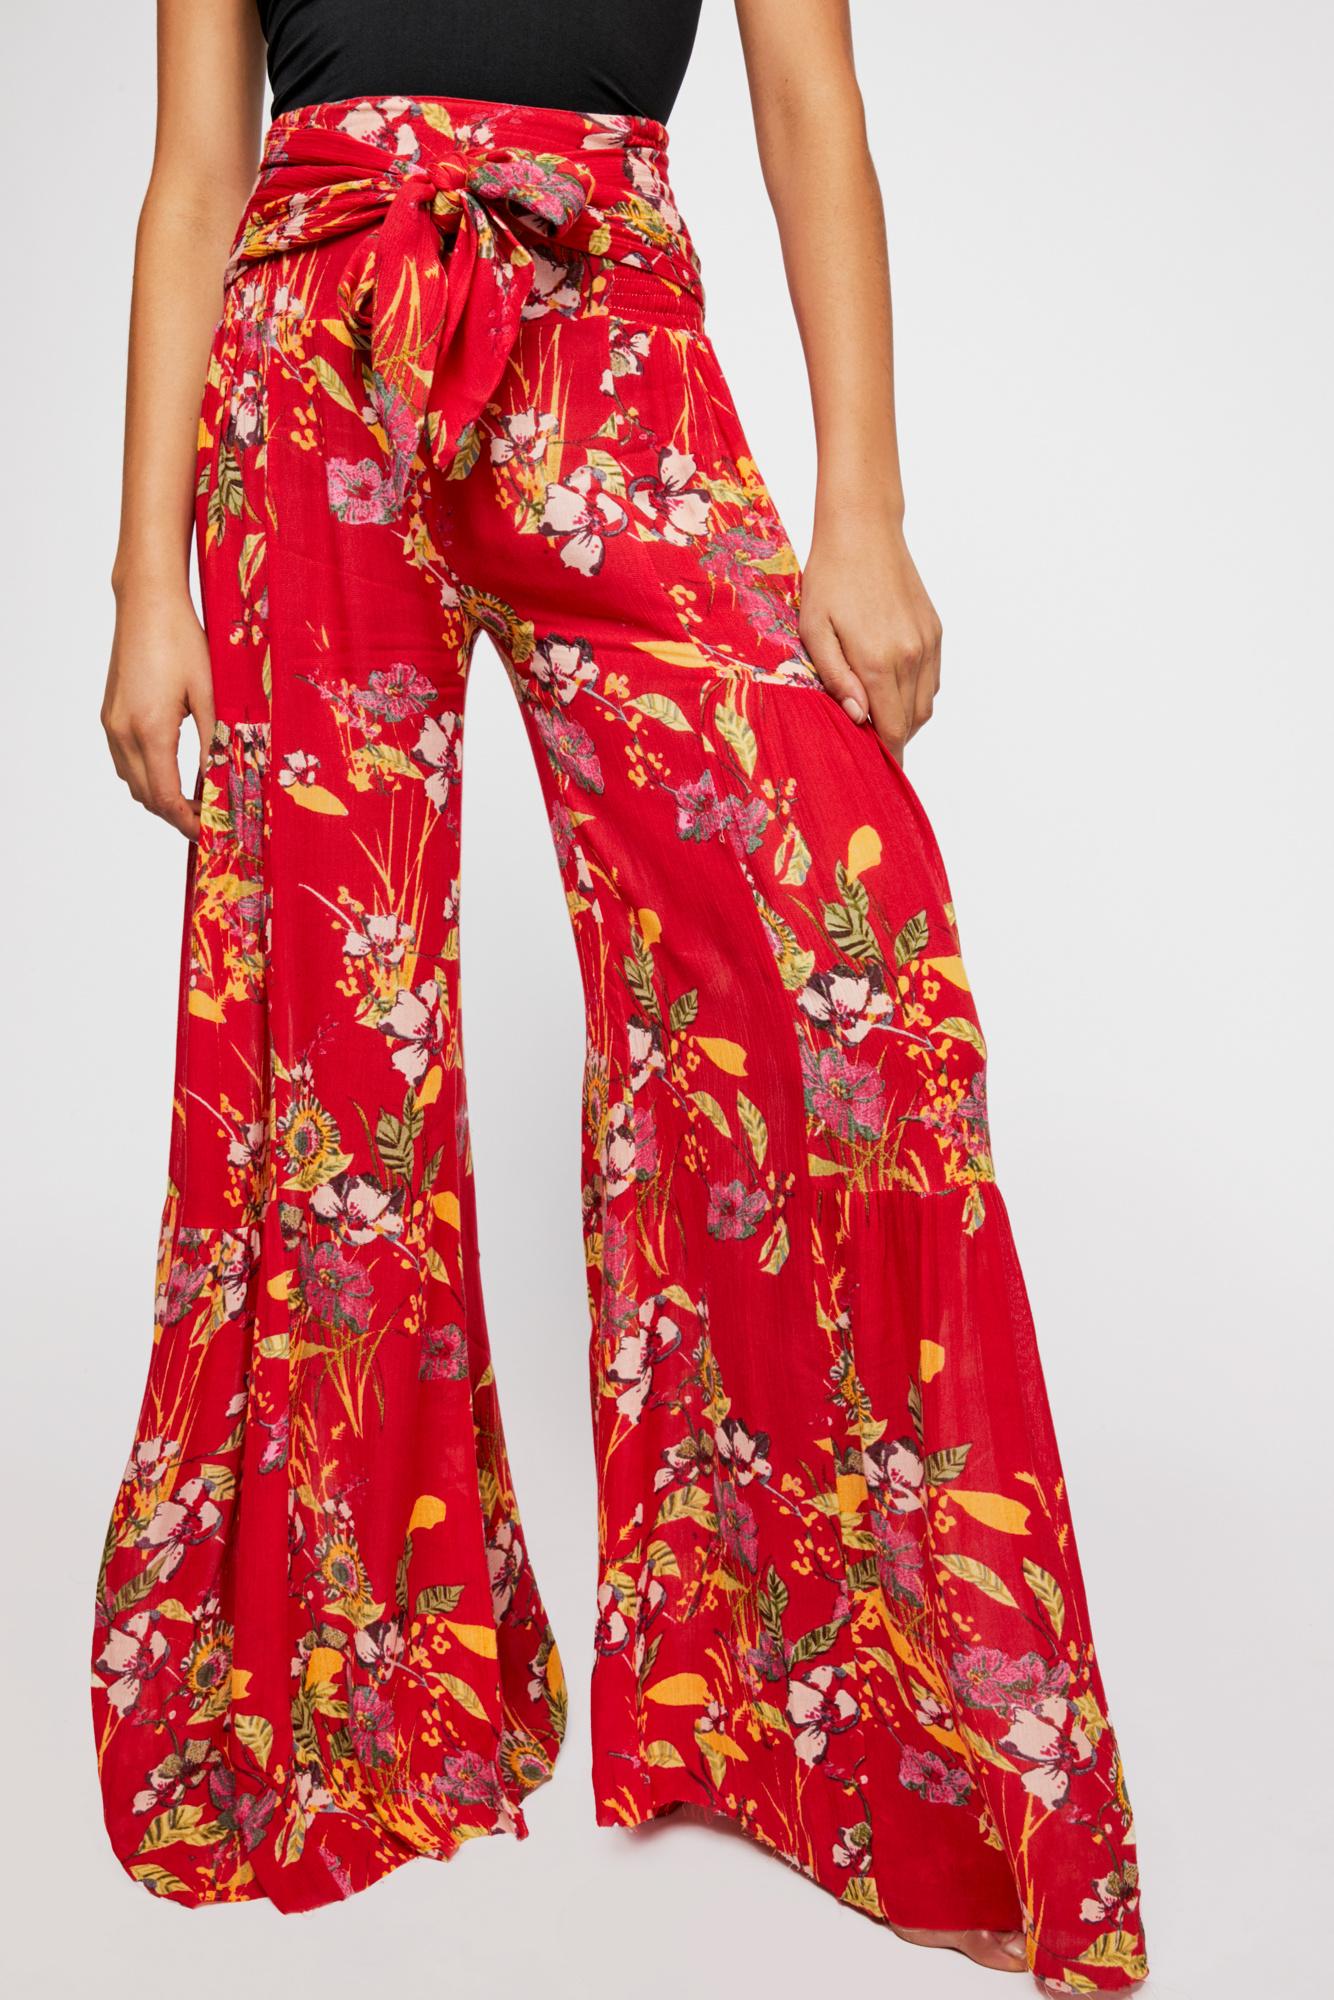 Free People Fp One Aloha Printed Wide-leg Pants in Red Combo (Black) - Lyst